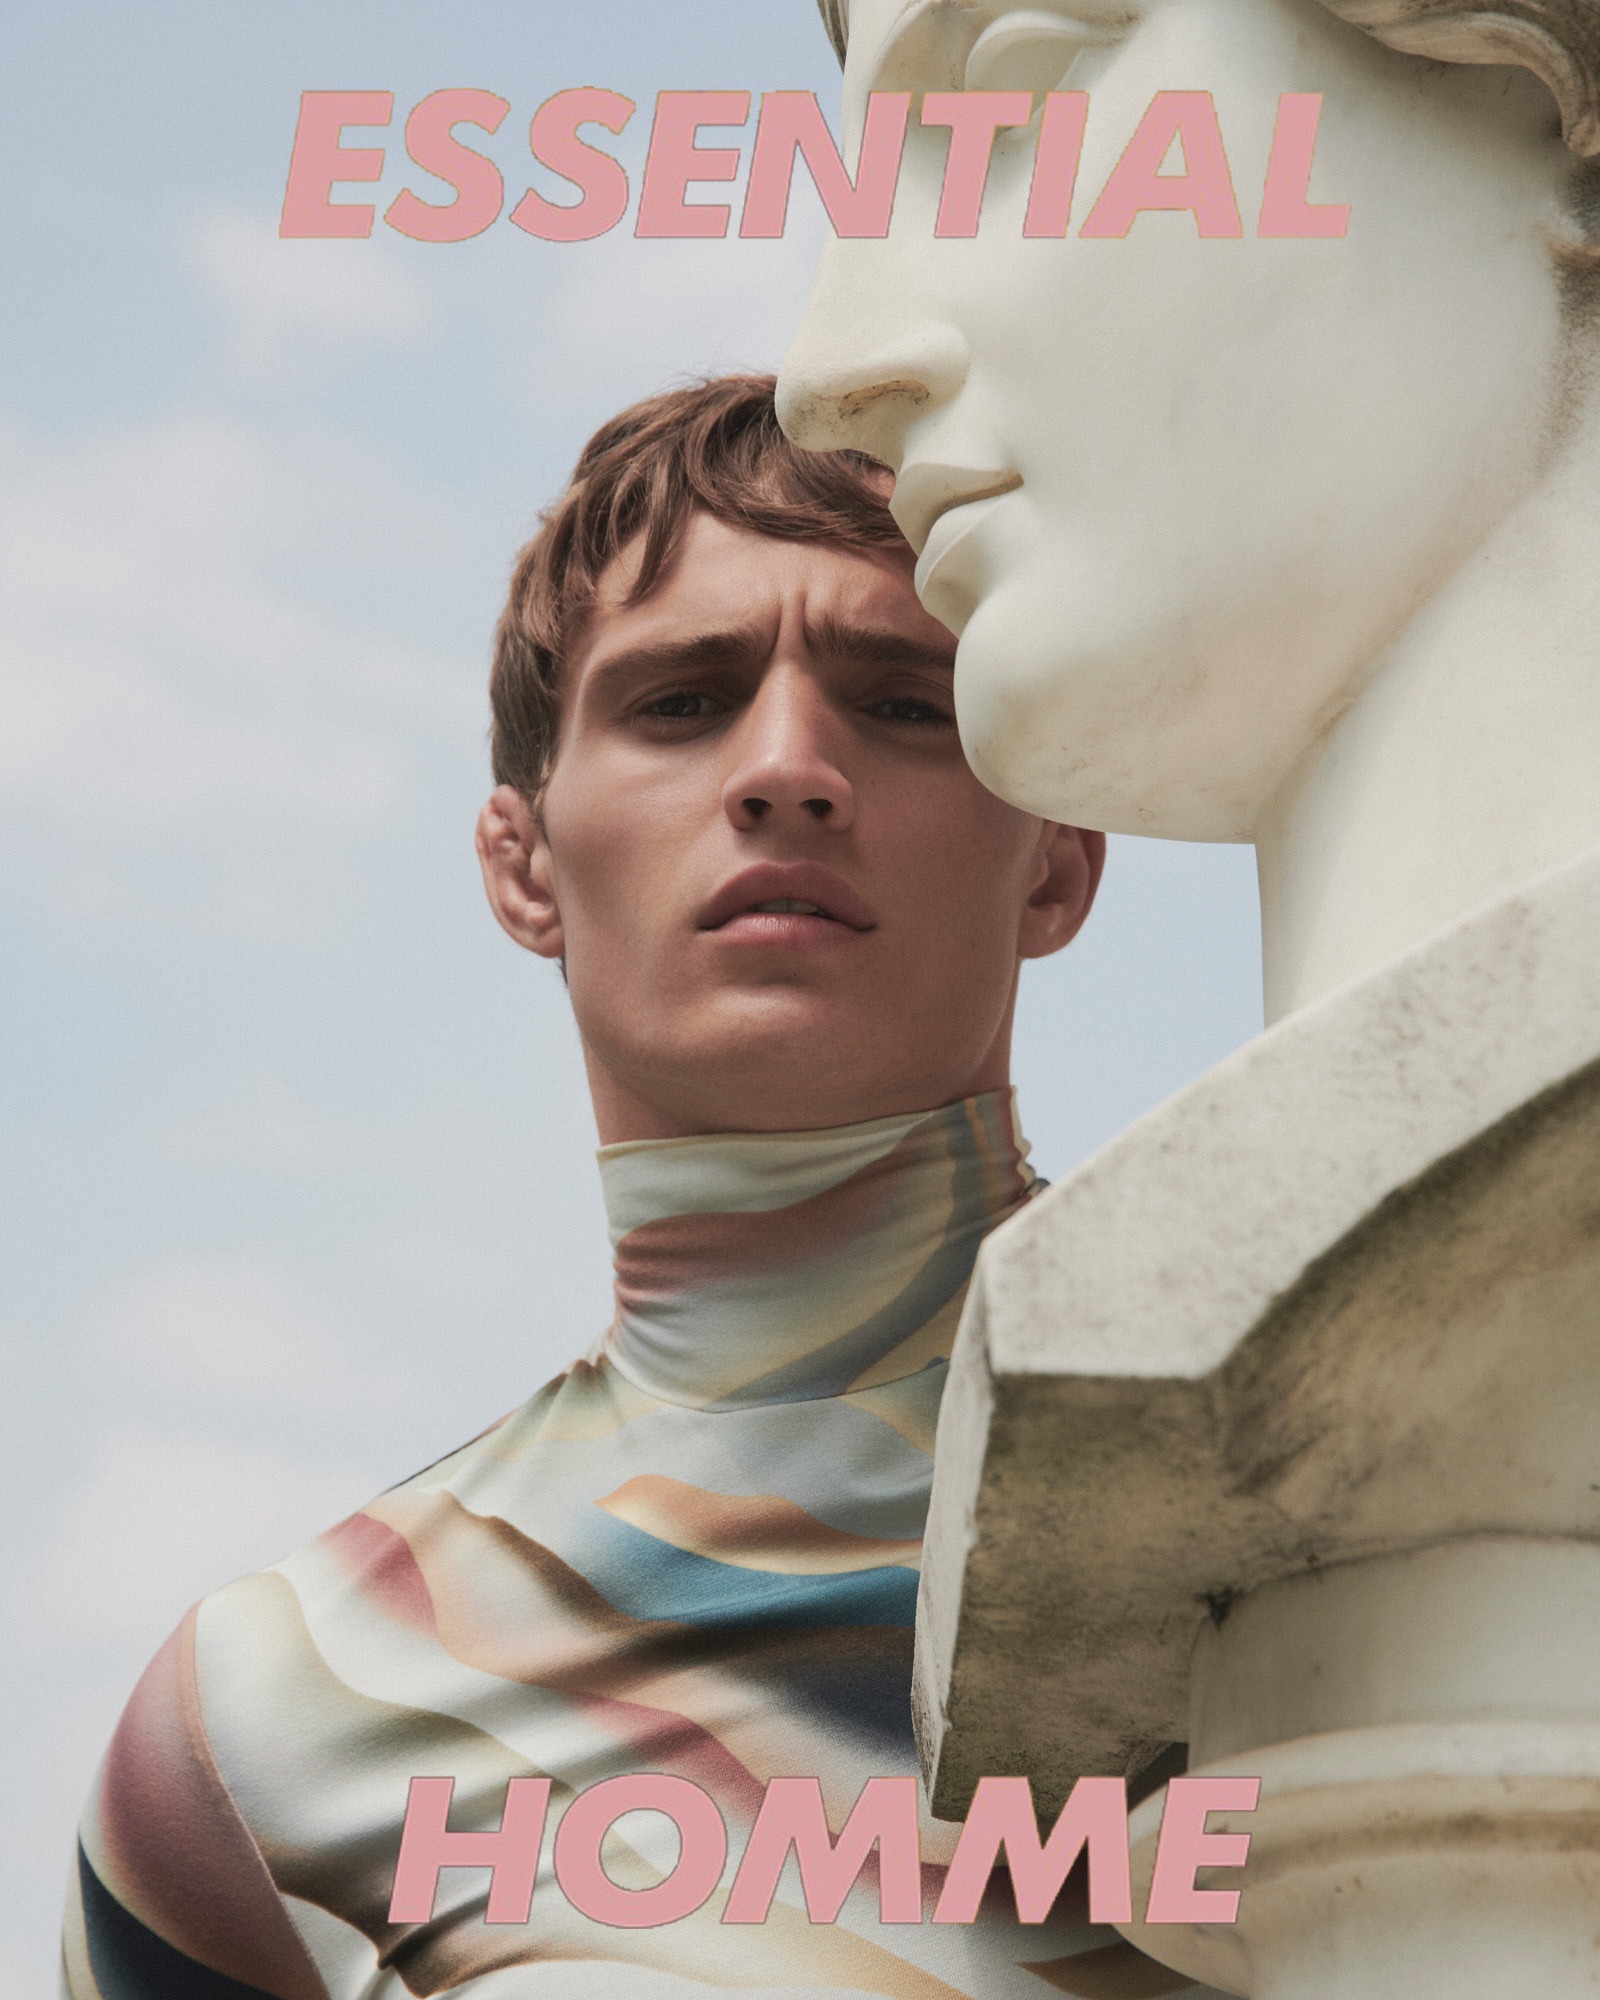 Essential Homme Magazine 1 by Andreas ORTNER